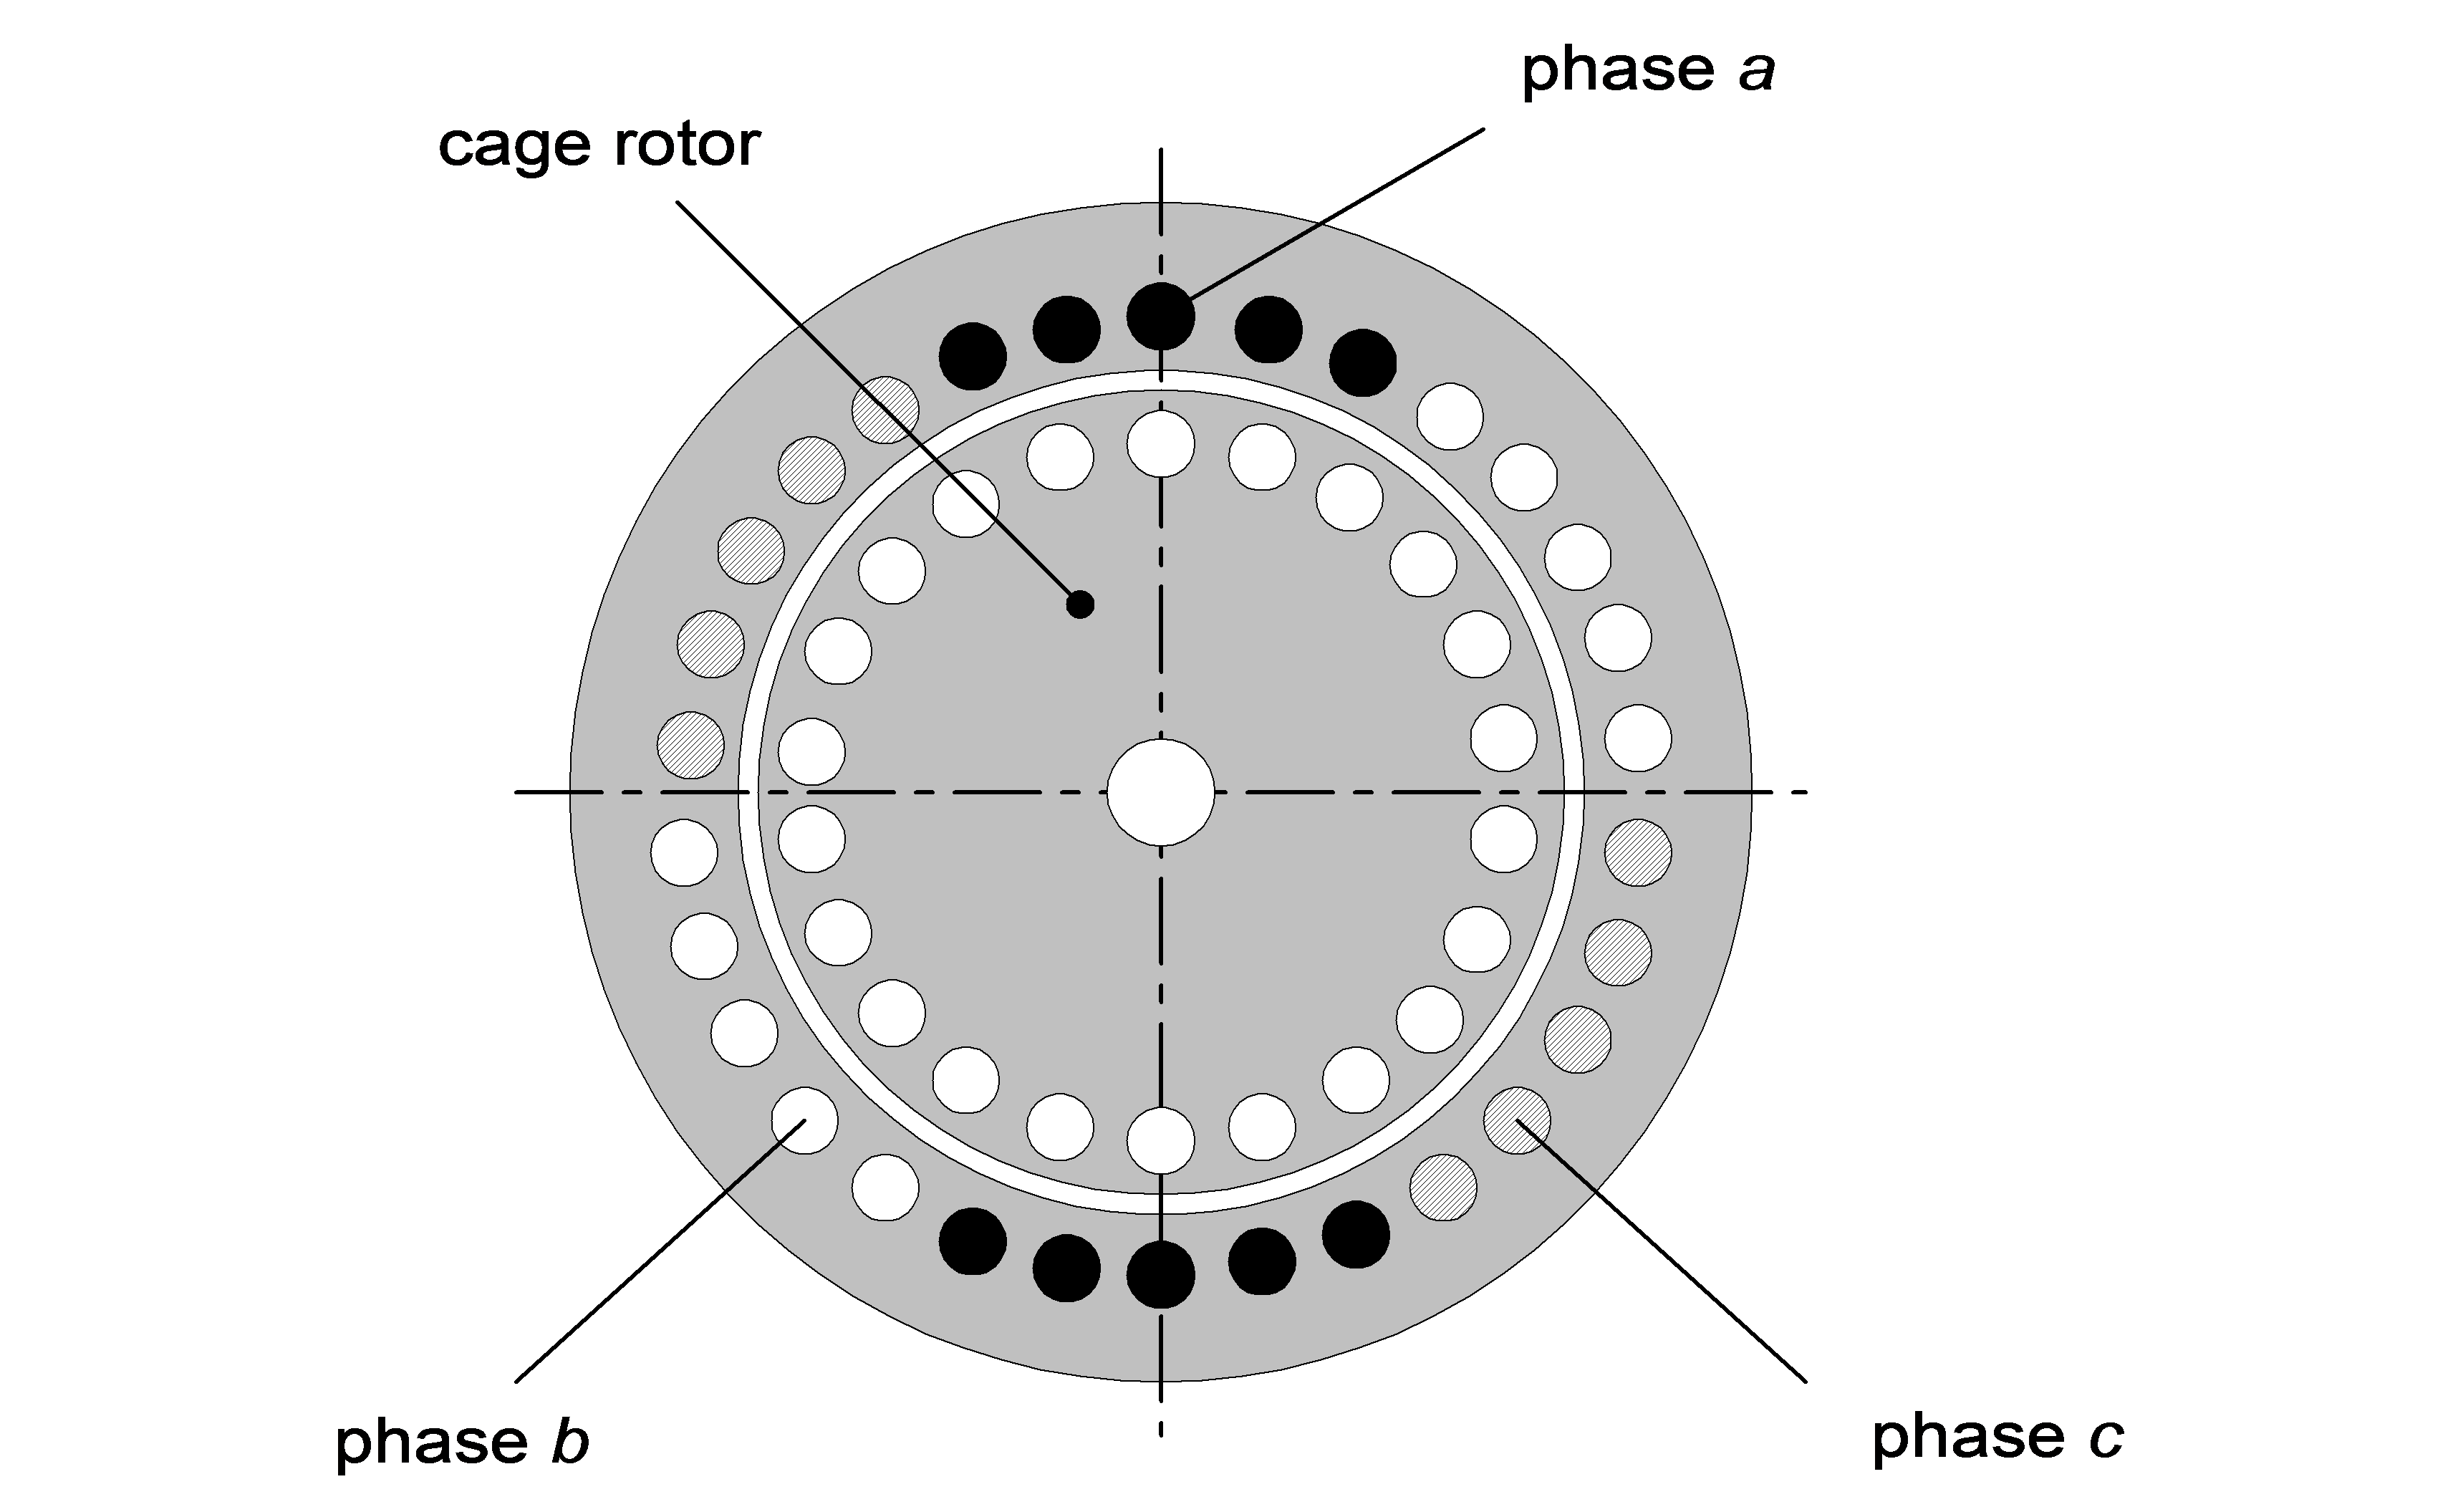 Thesis on induction motor